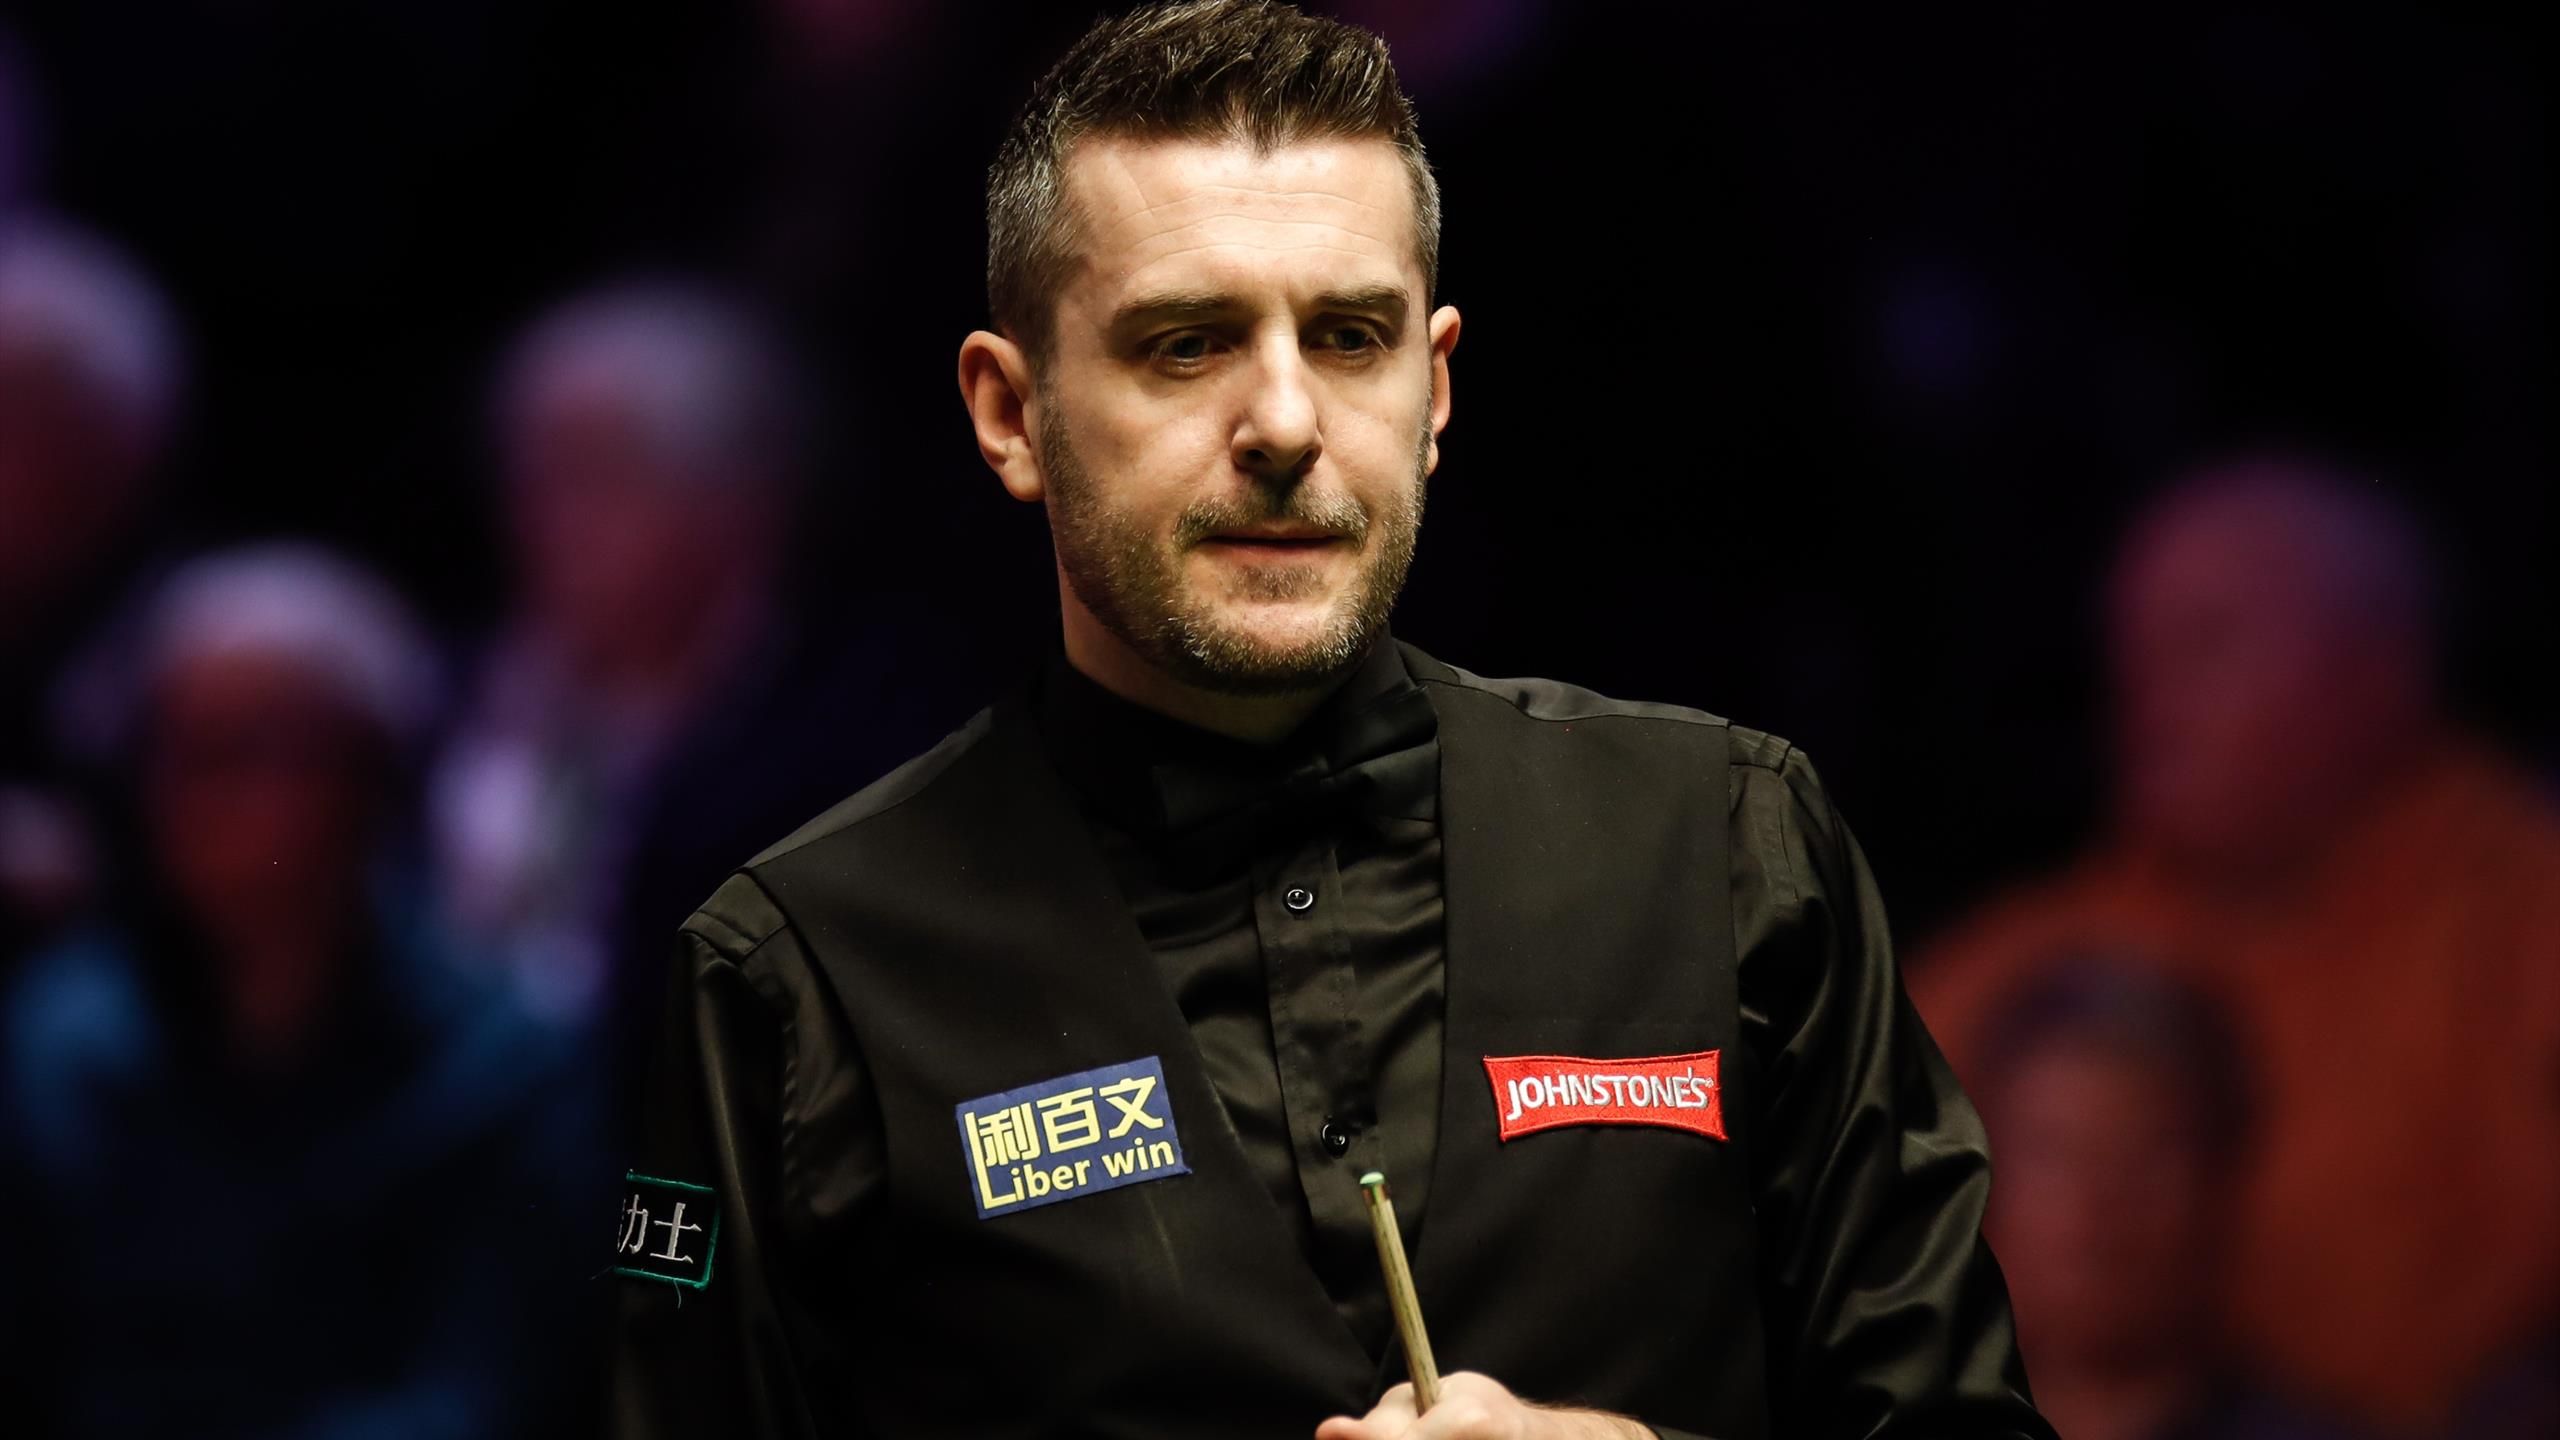 Mark Selby cautious of tough first-round matchups at the Crucible during World Championship qualifiers